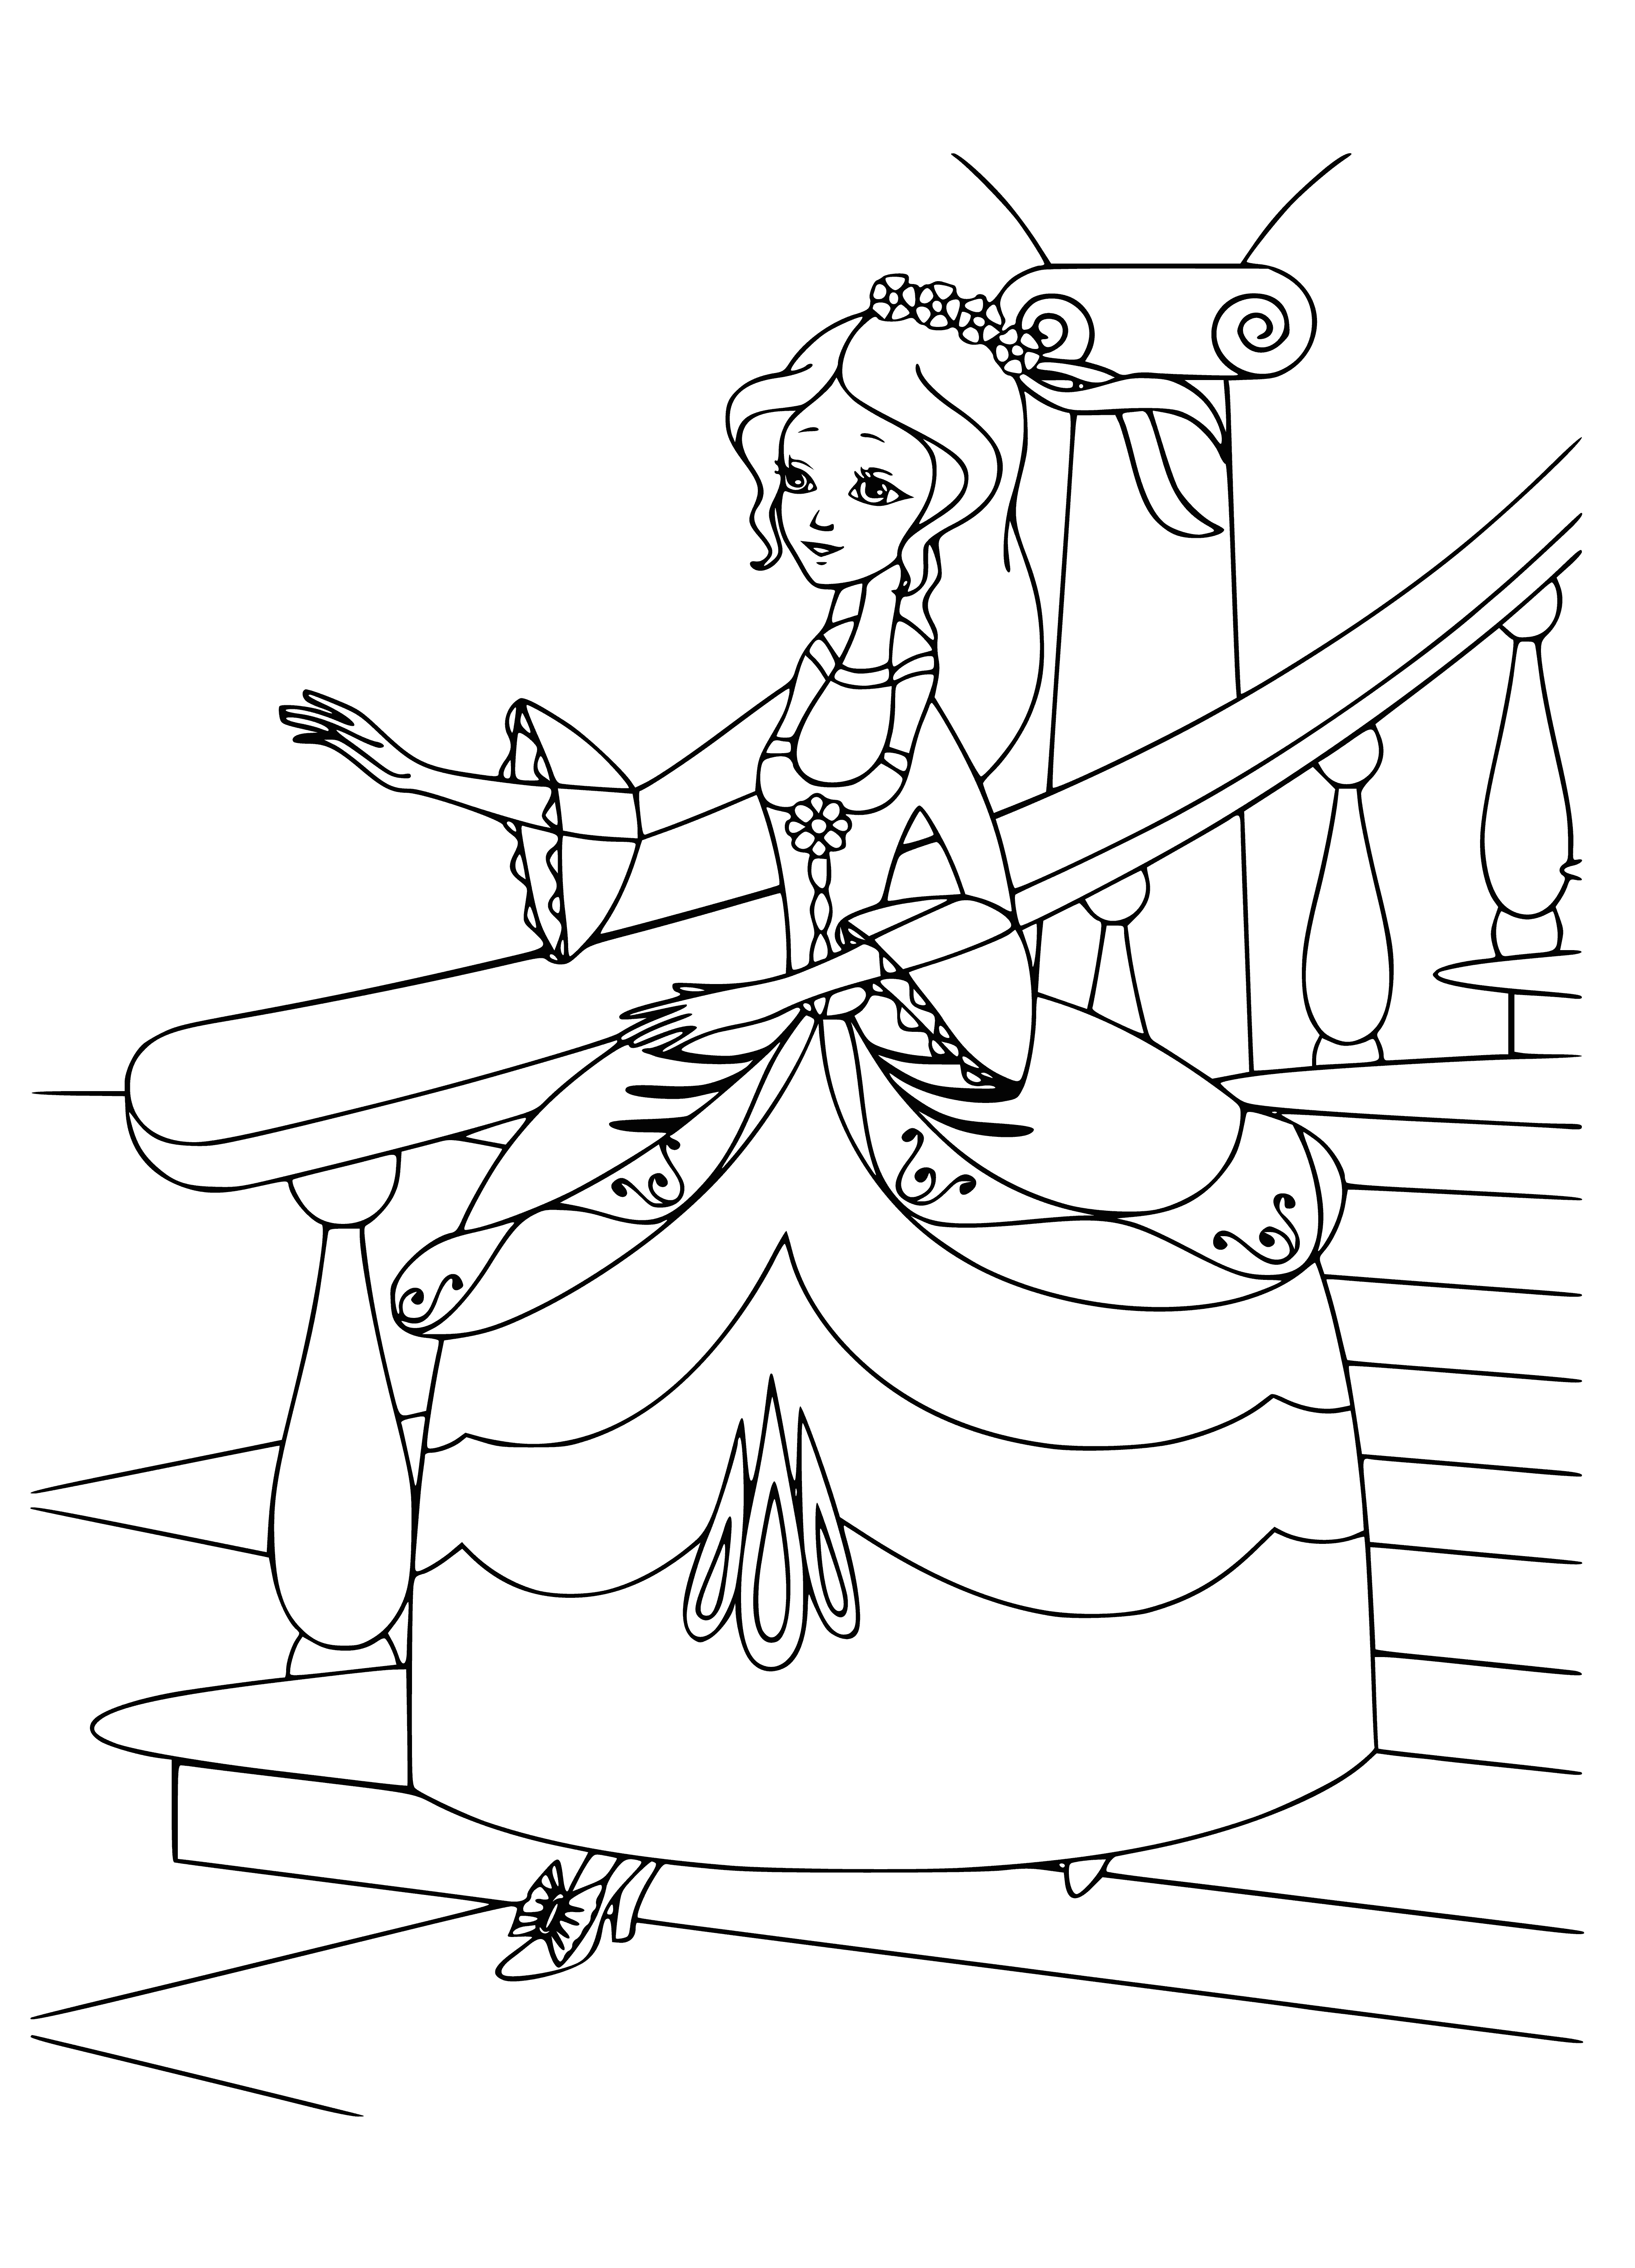 coloring page: Woman stands in ballroom, wearing white dress, blue ribbon & holding glass of water in her left hand. #description